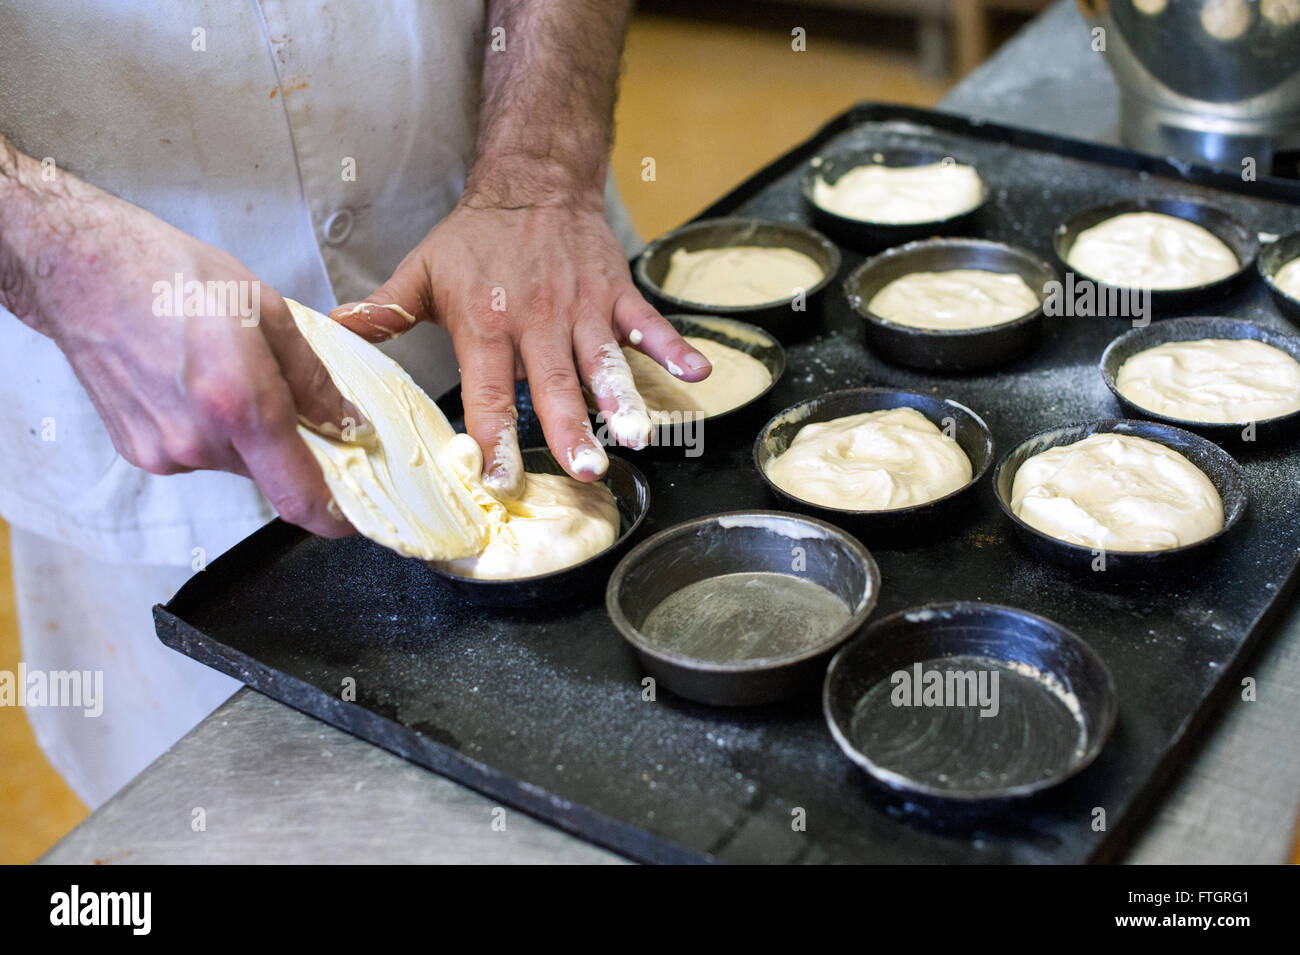 Baker making pastries in a bakery filling metal oven tins on a tray for baking with raw dough , close up of his hands Stock Photo